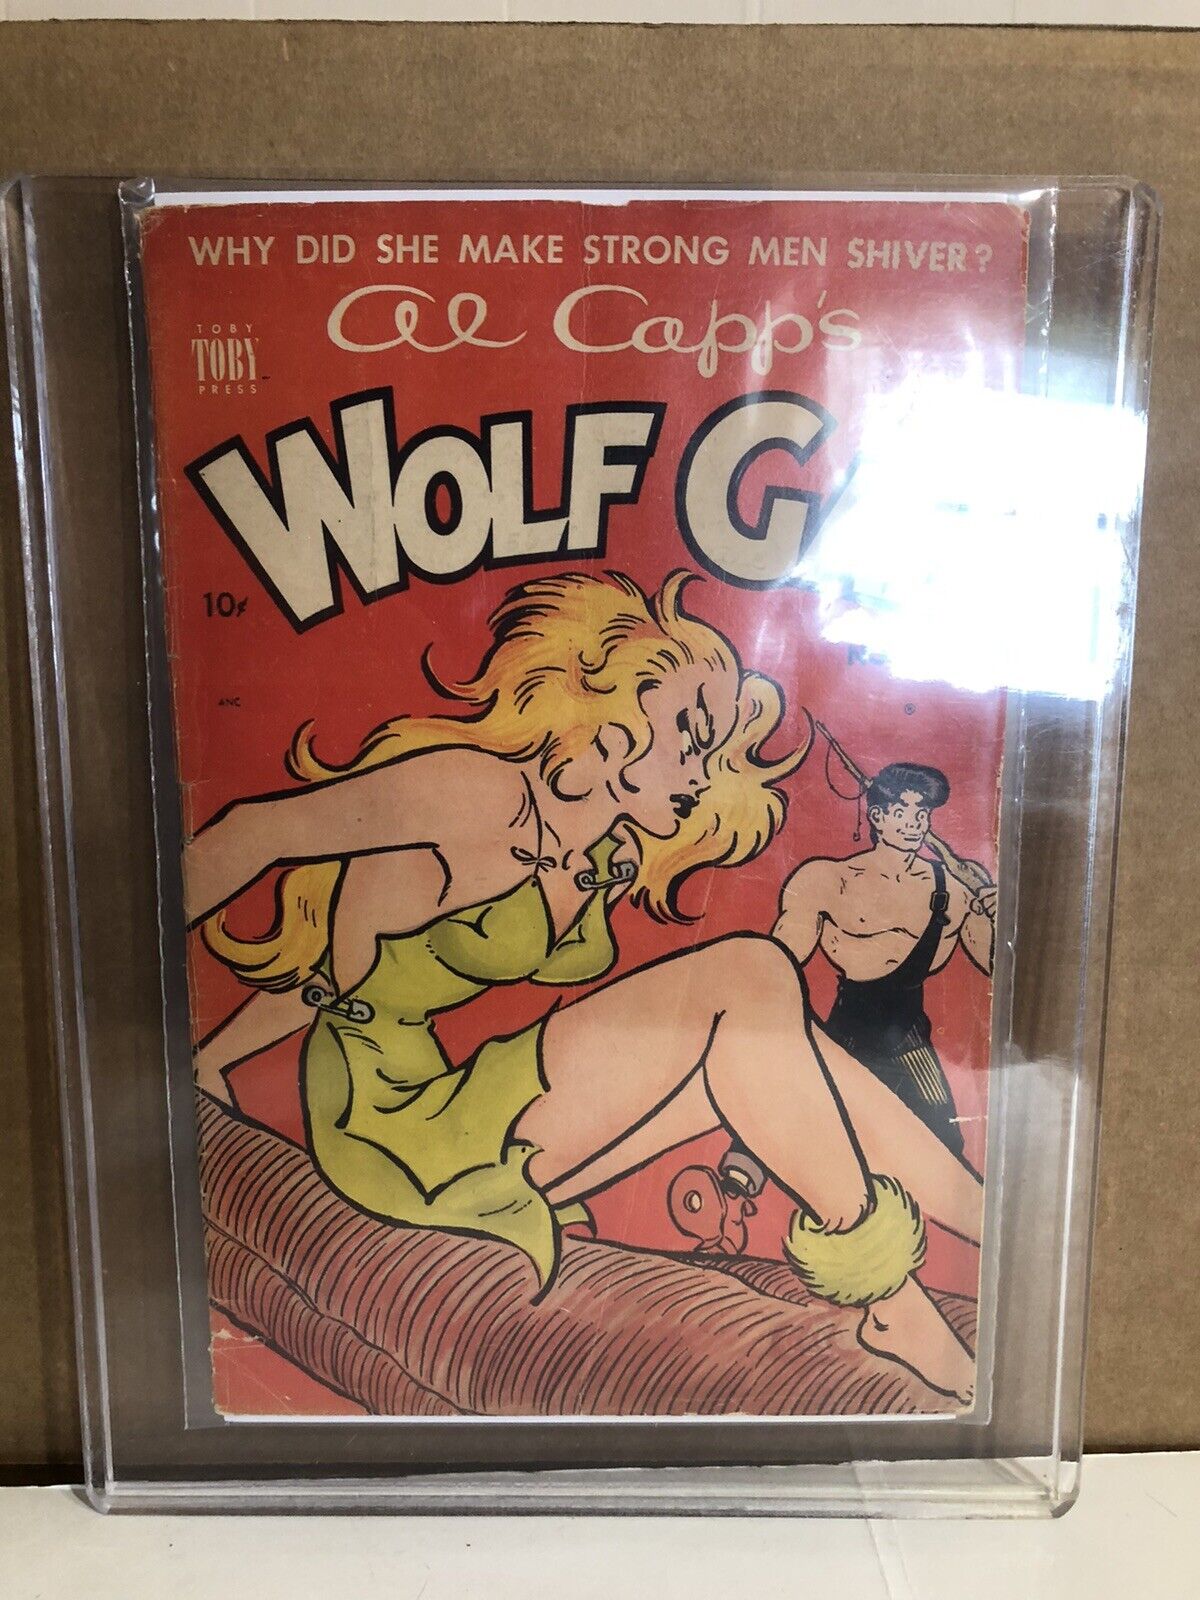 AL CAPP’S WOLF GAL # 1 - TOBY PRESS - 1951 ISSUE